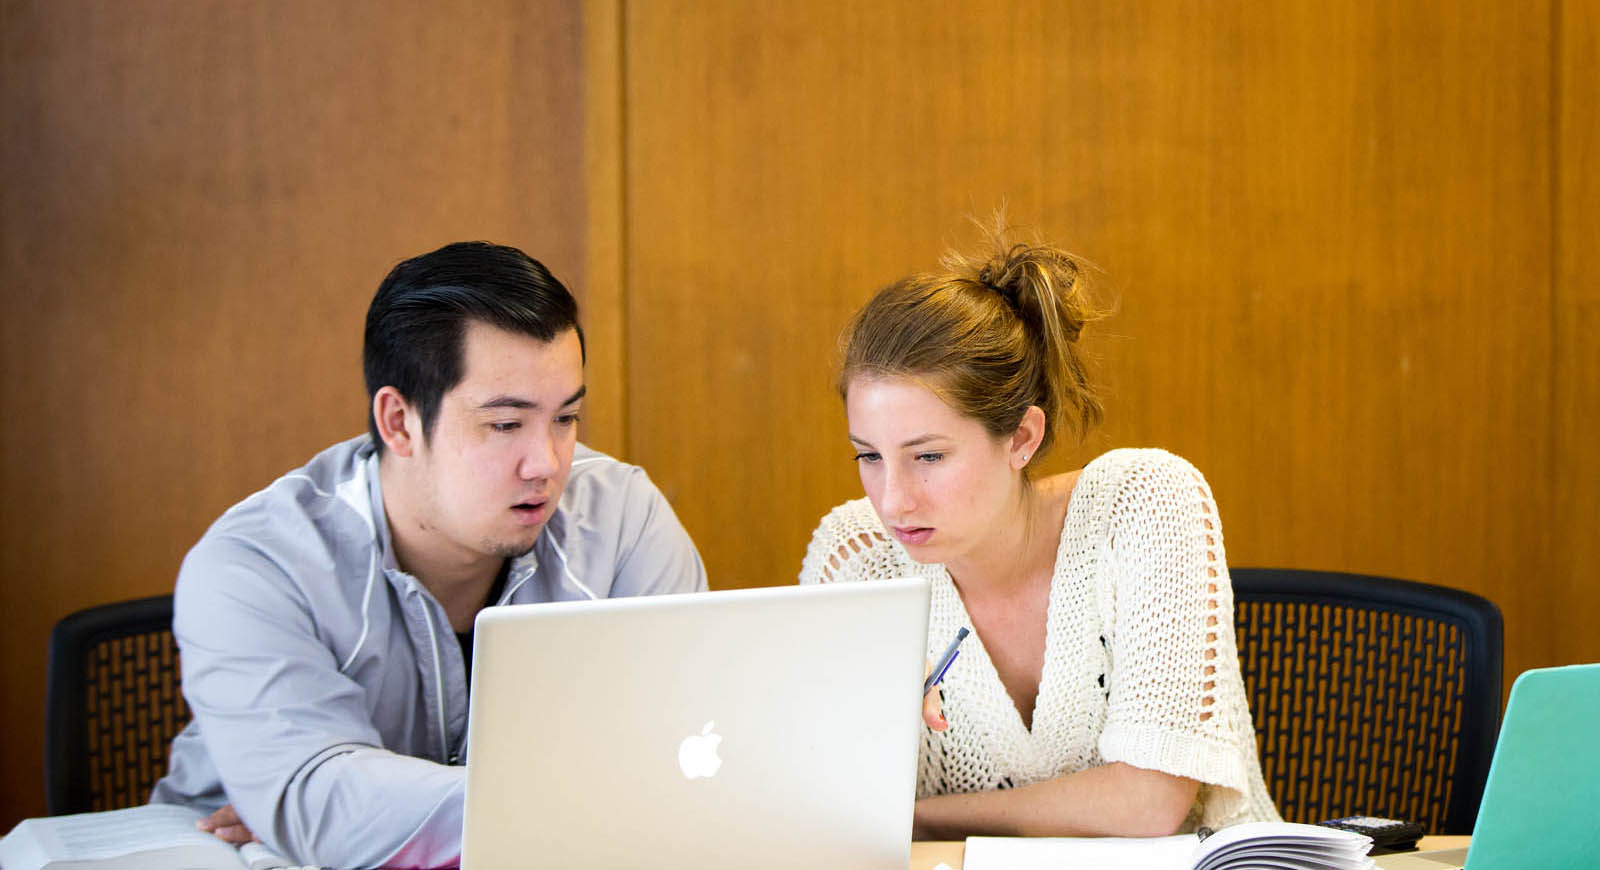 Photo of two Chatham University students looking at a laptop together